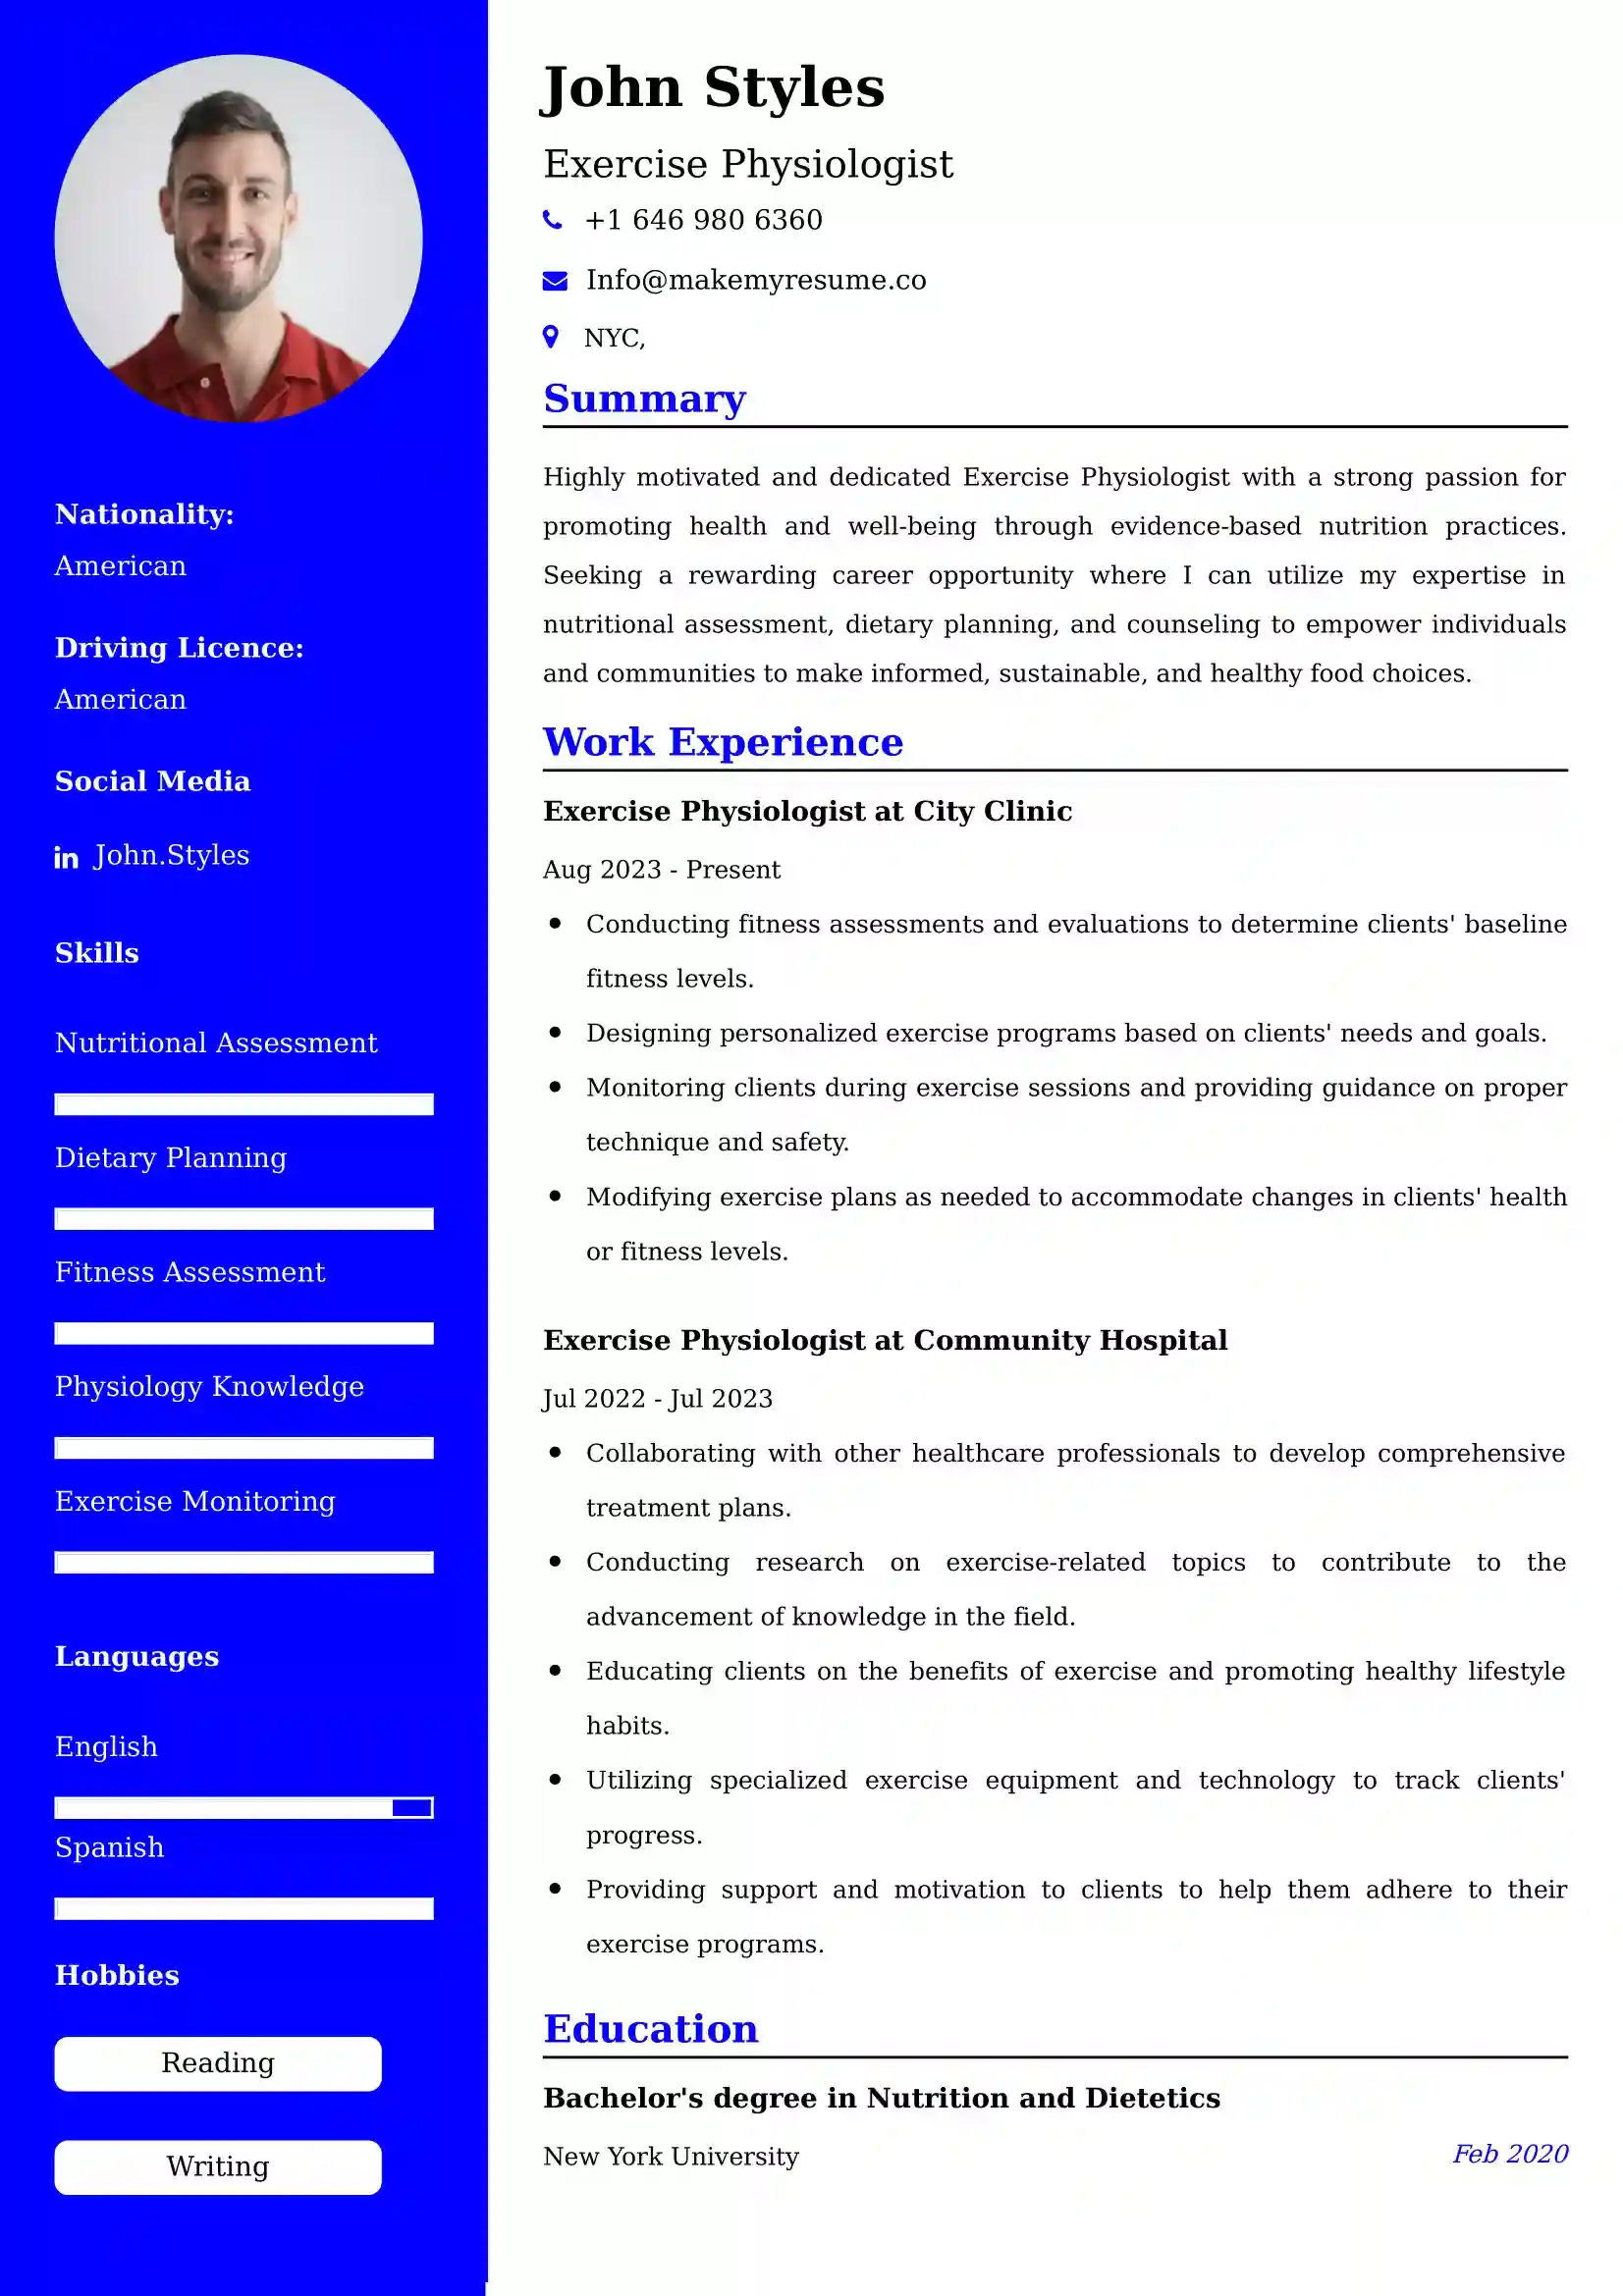 Exercise Physiologist Resume Examples - UK Format, Latest Template.